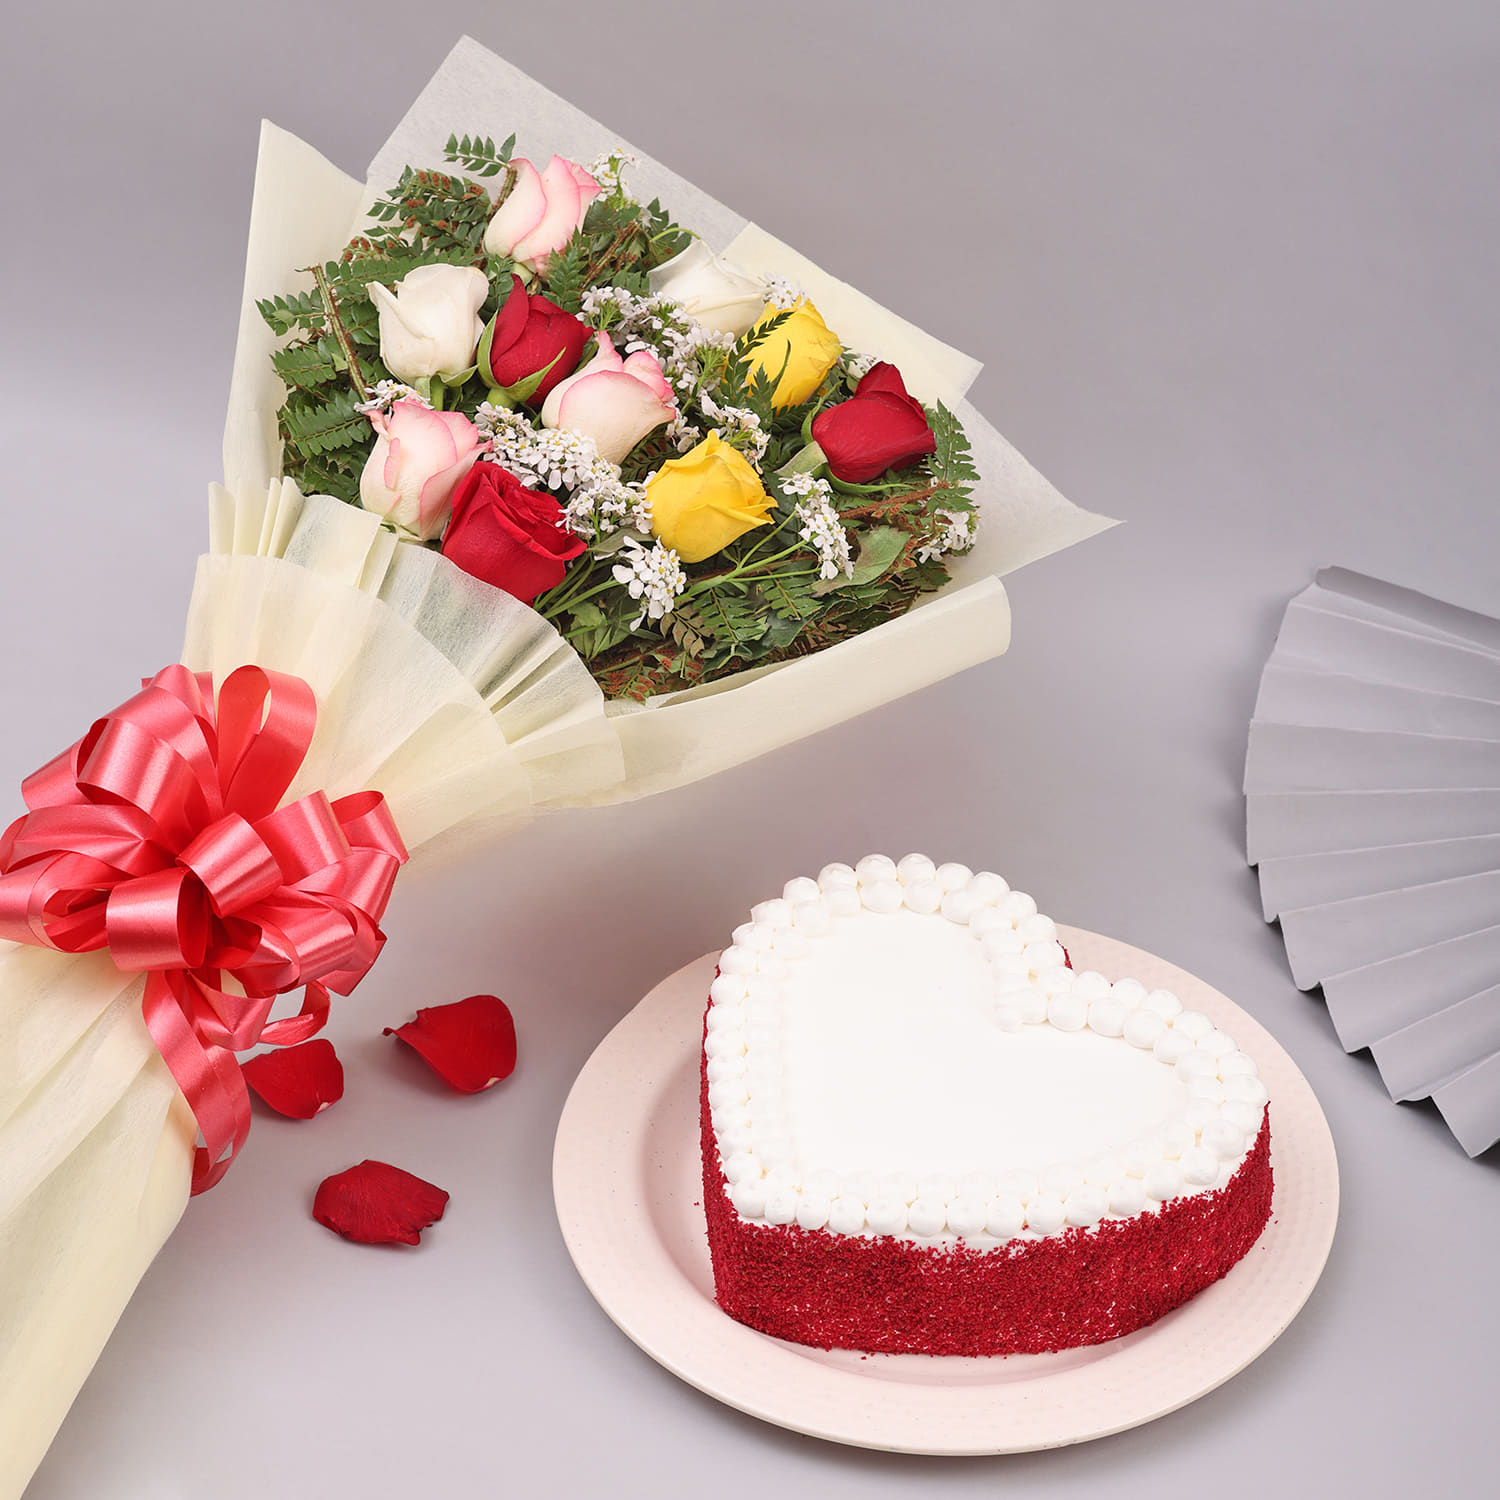 Send Cakes Online | Cake Delivery In Pakistan | Order Now!– TCS  SentimentsExpress